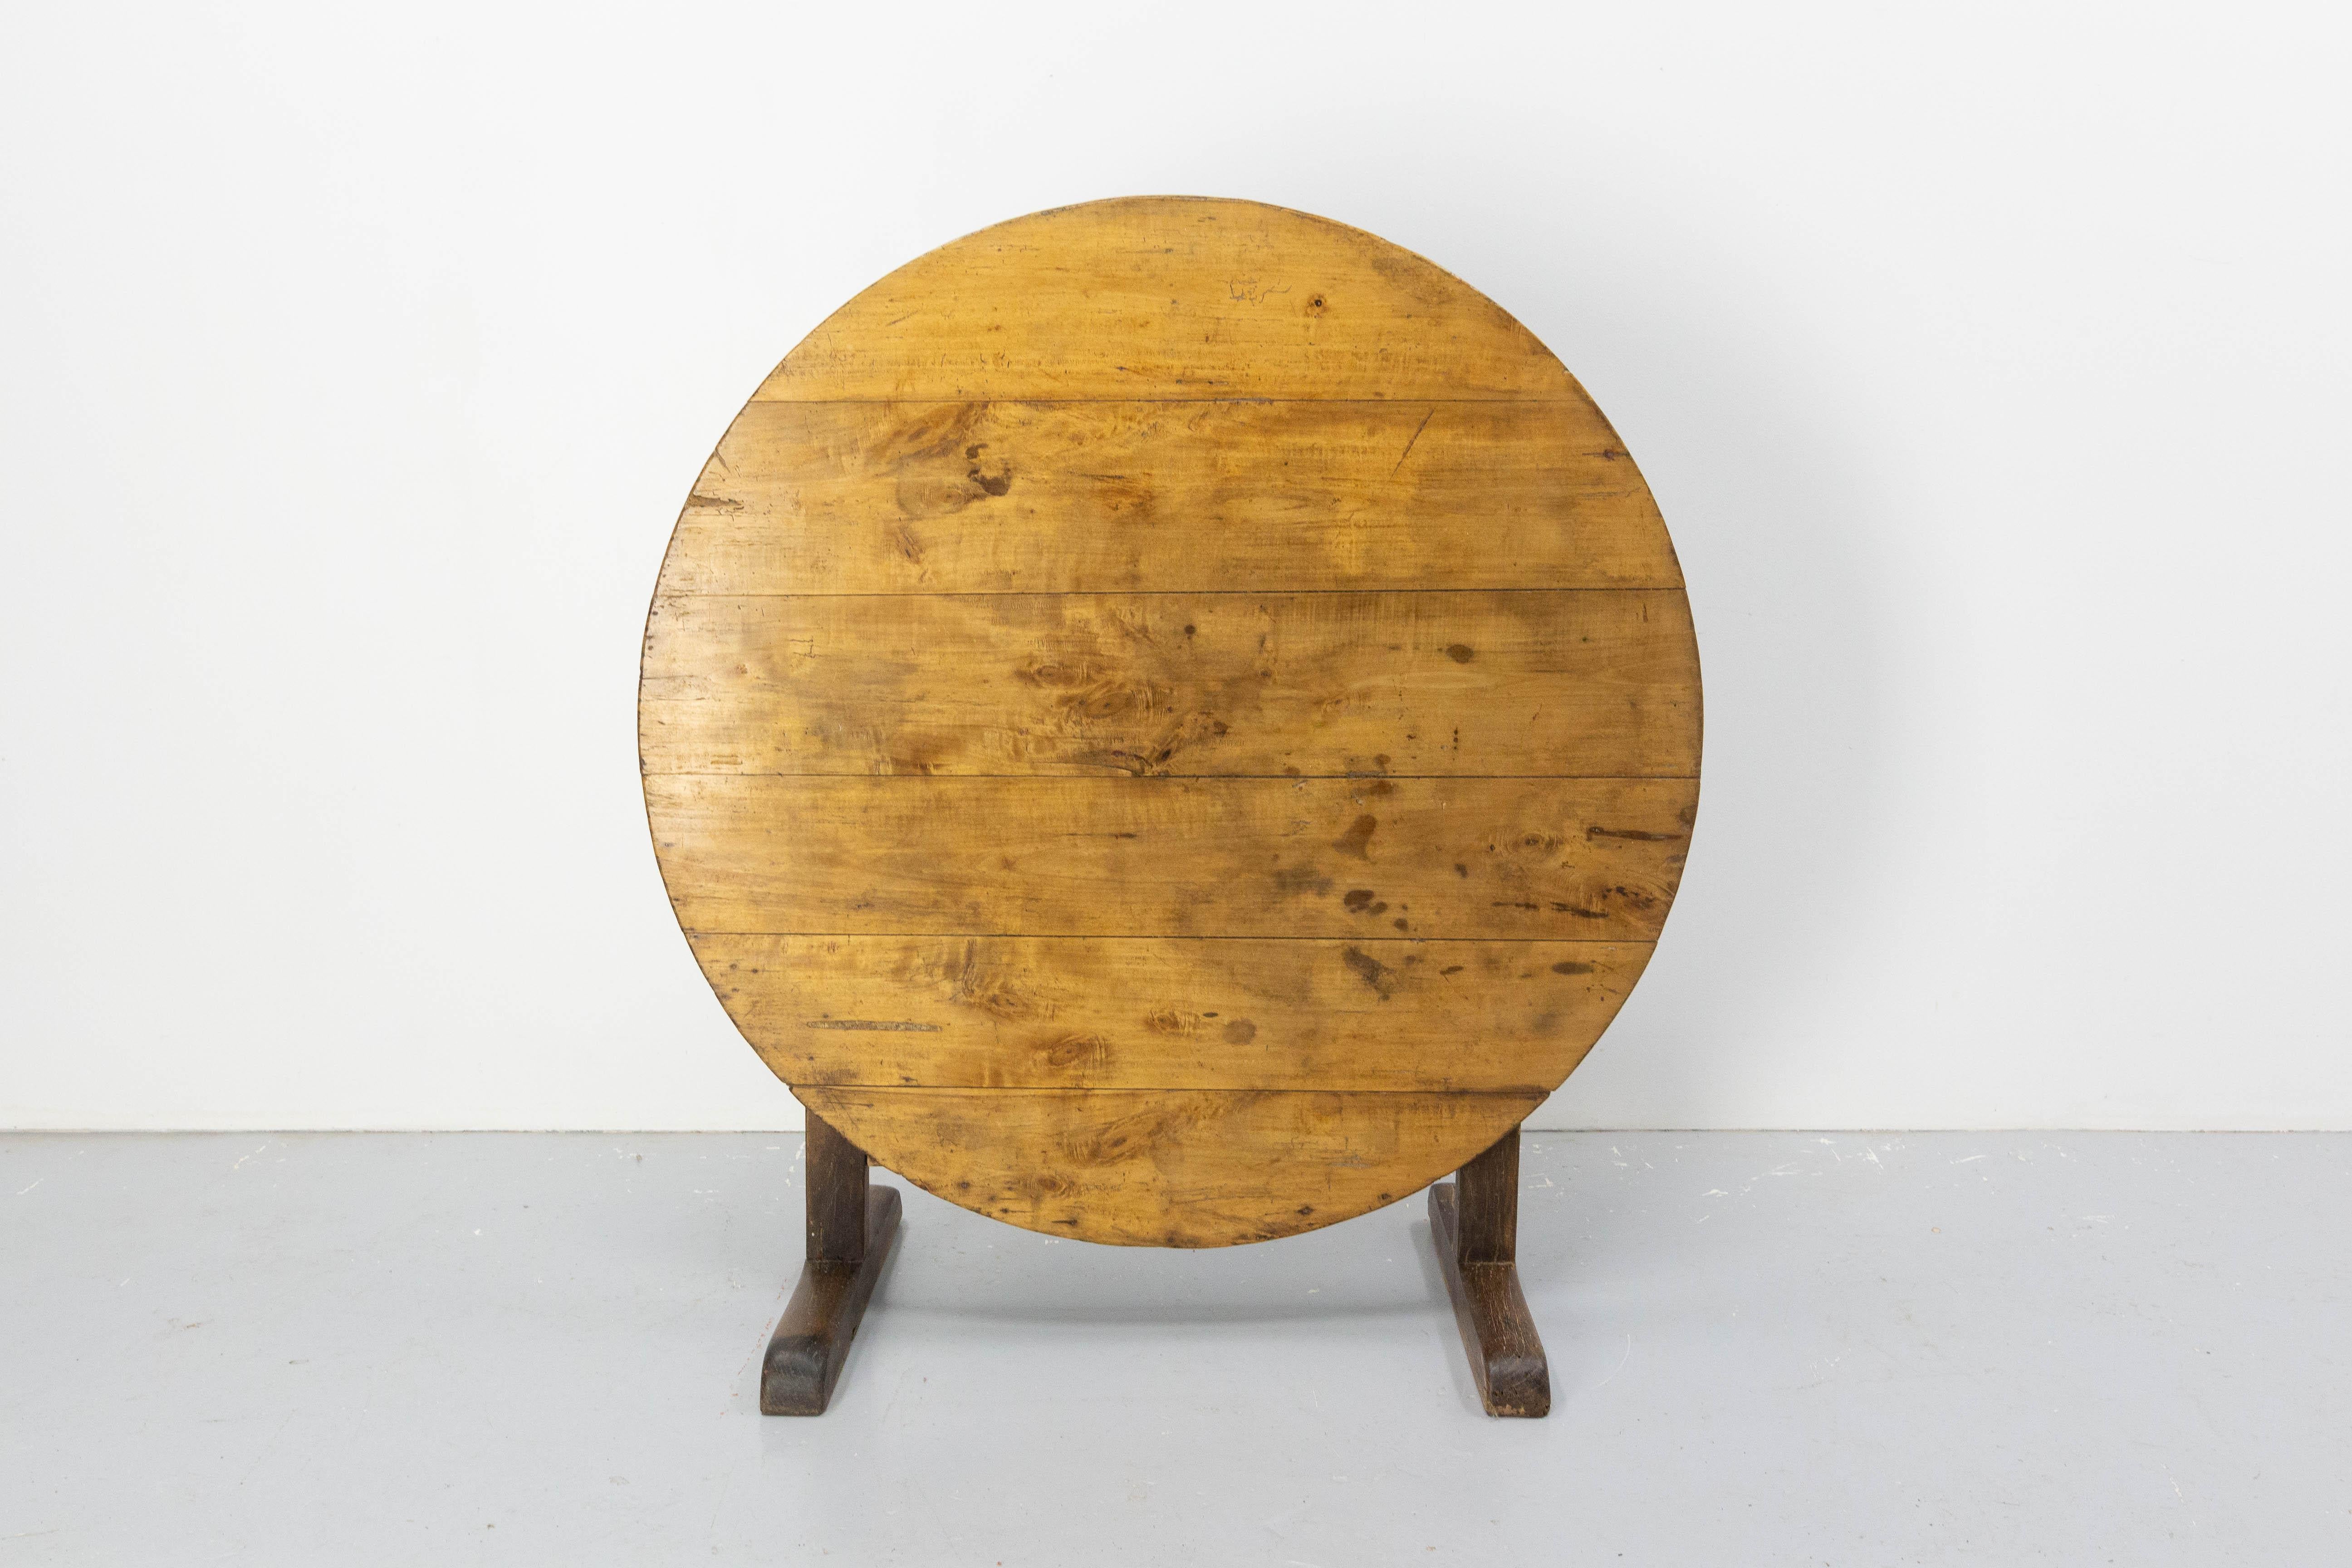 French oak and poplar table made in the mid-19th century.
The 